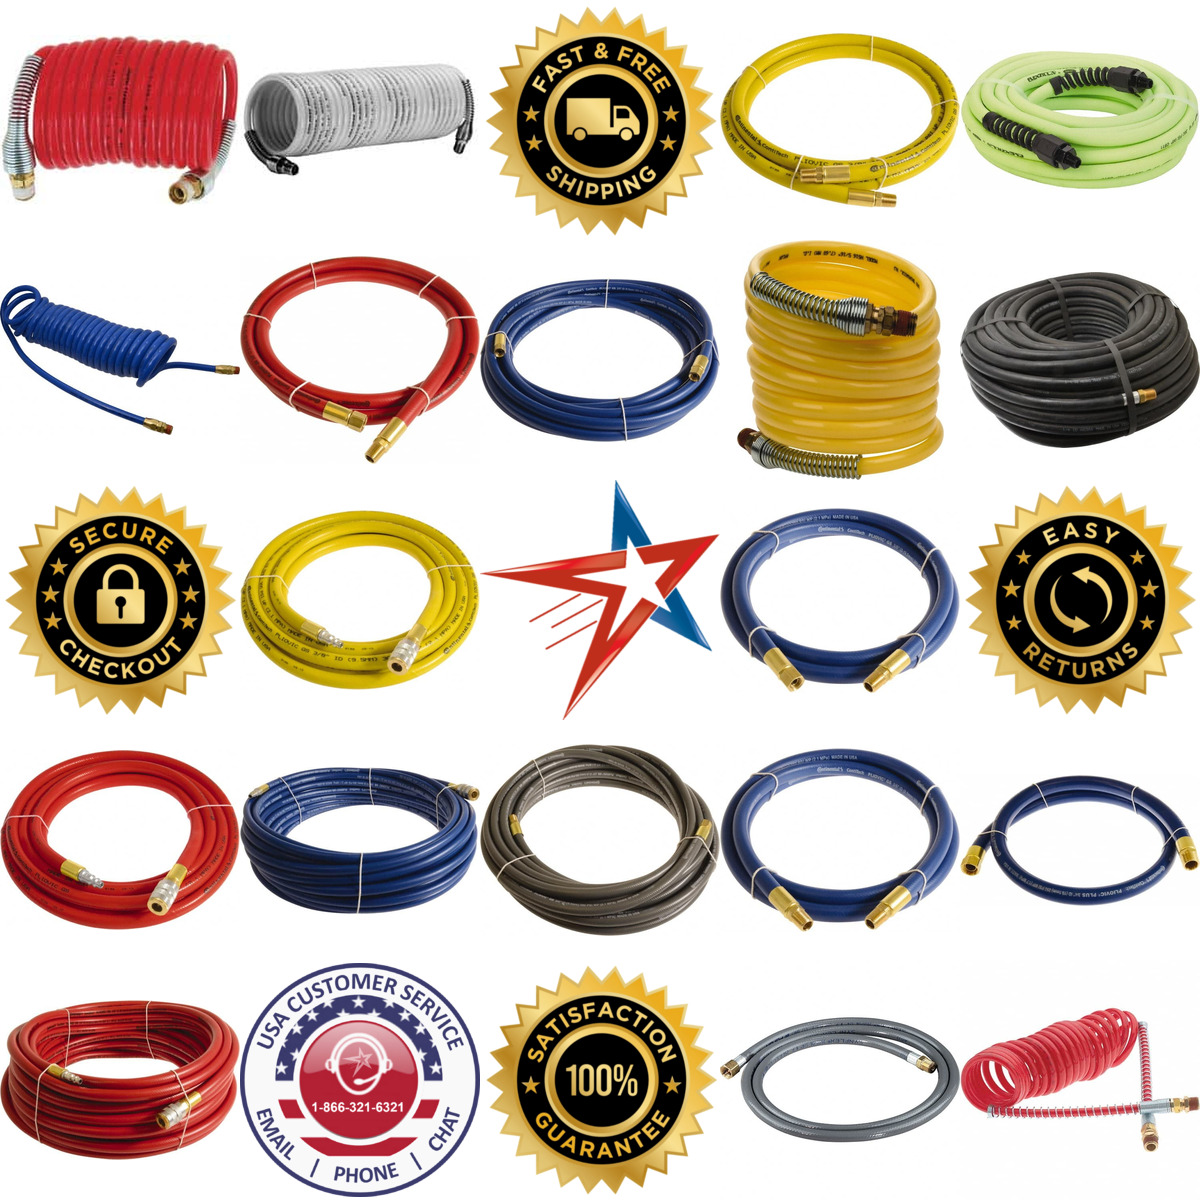 A selection of Air Hose products on GoVets